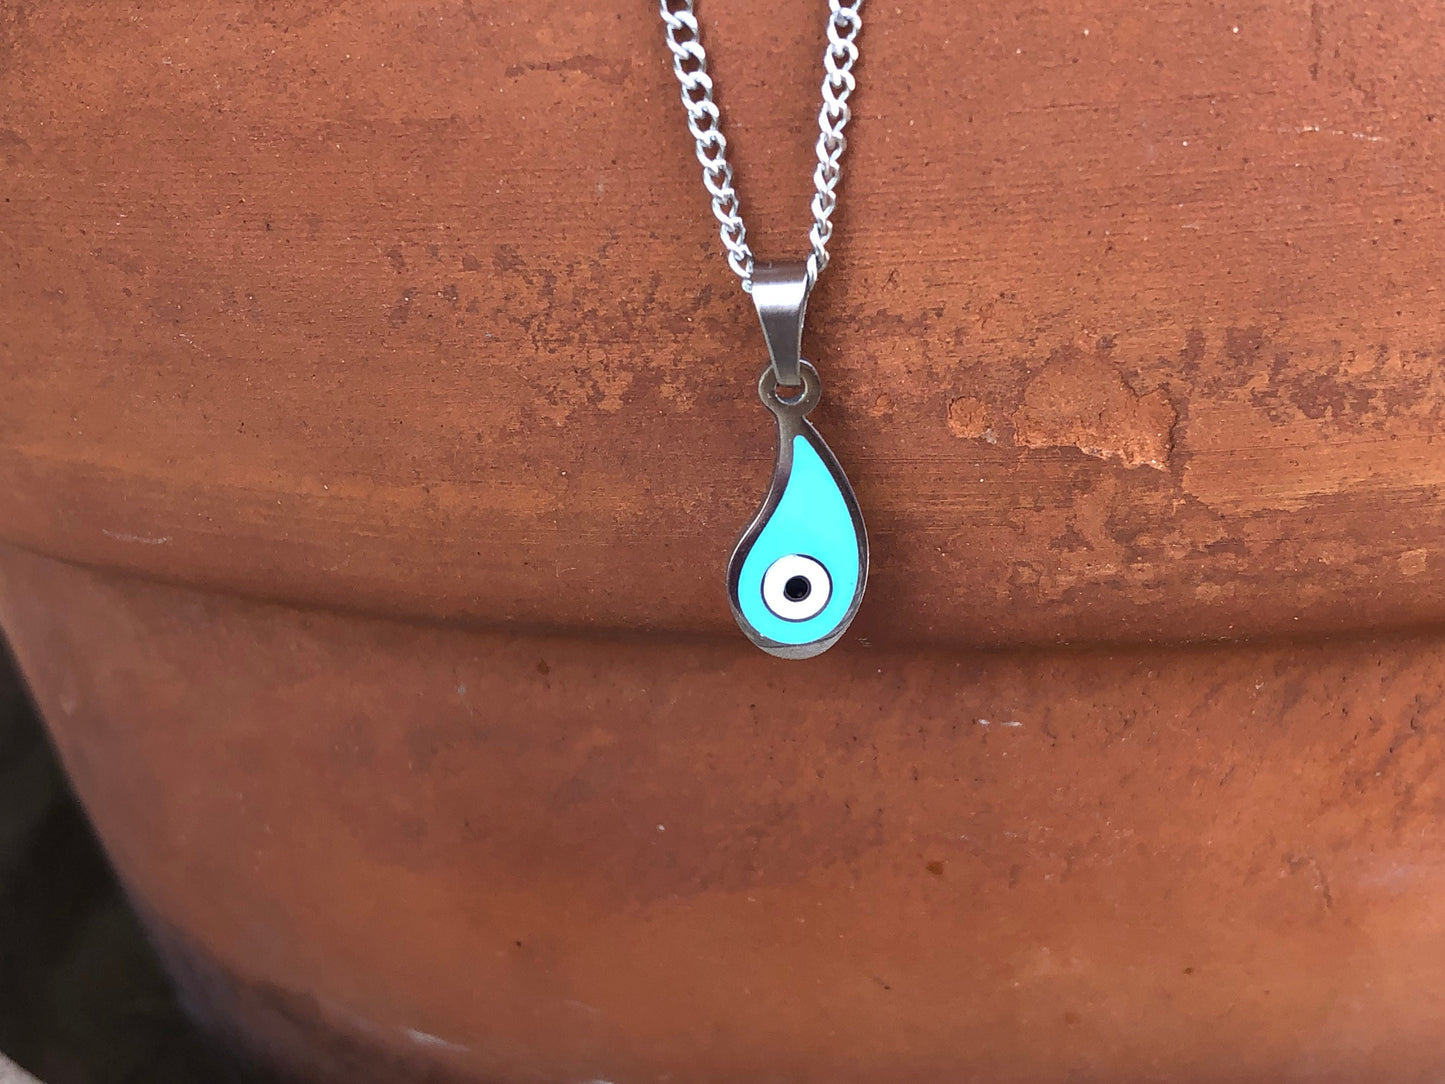 Enamel evil eye drop Necklace - Stainless jewelry - Gift for her - Tiny jewelry